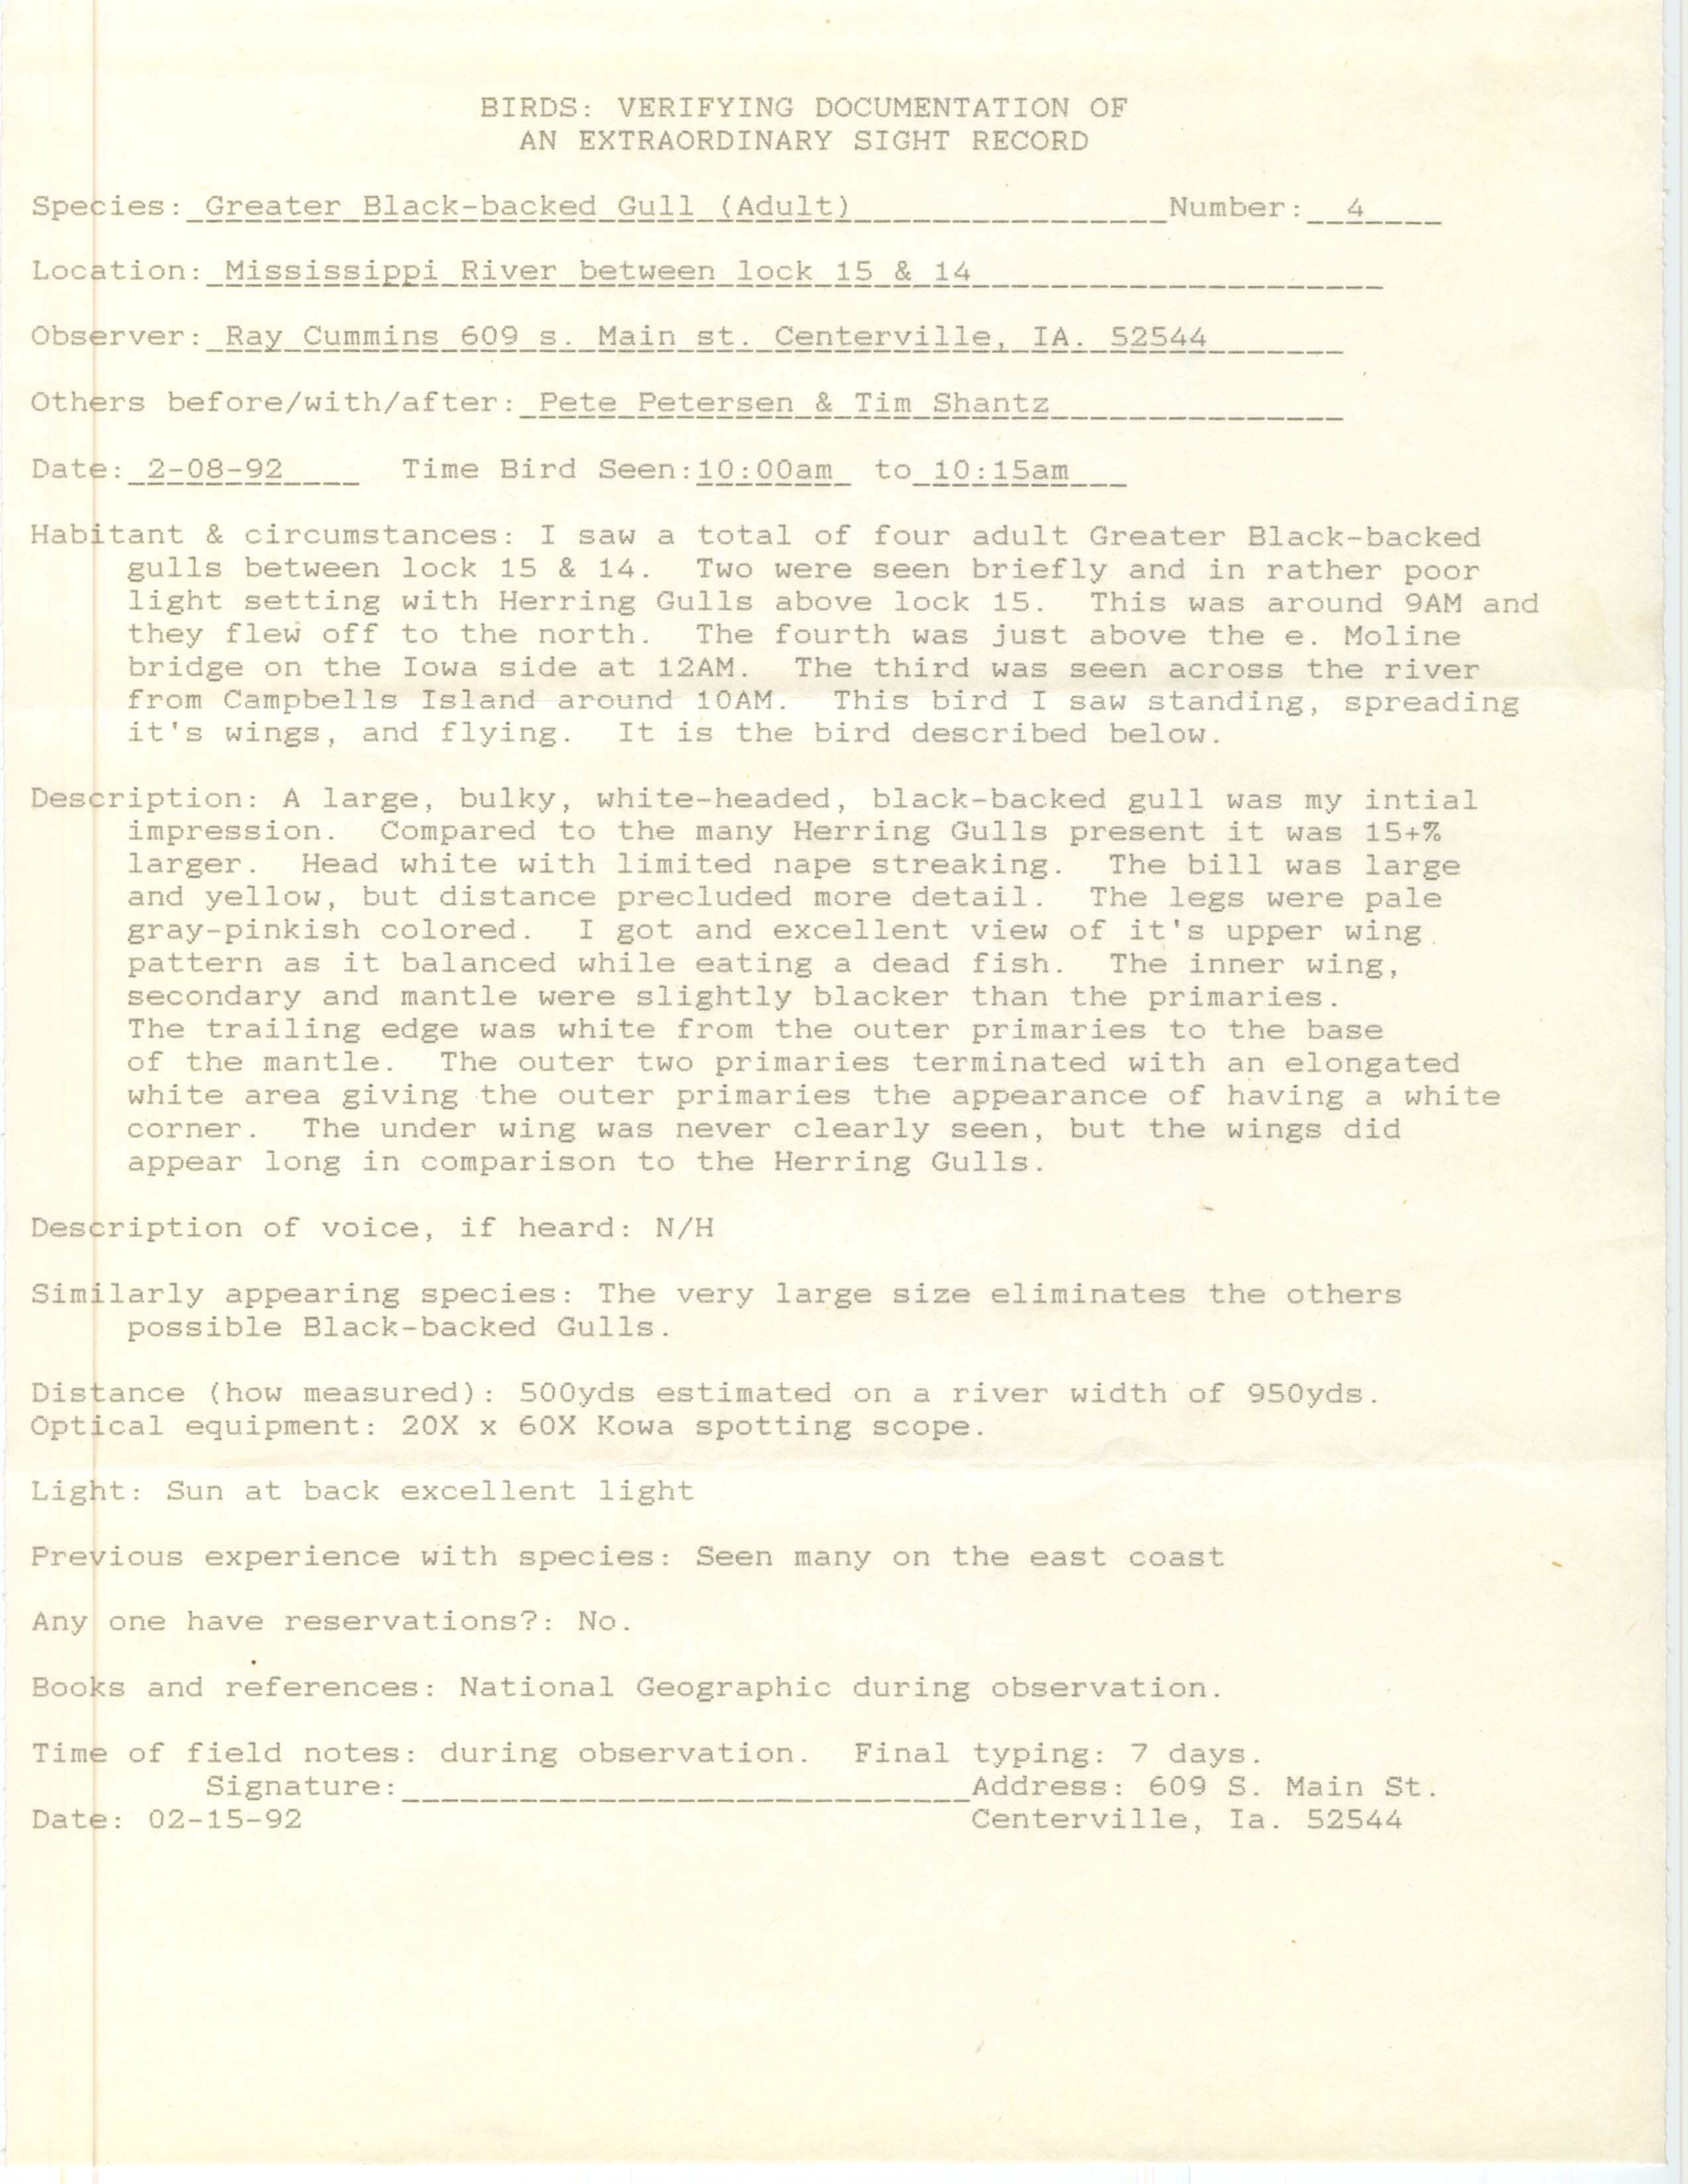 Rare bird documentation form for Greater Black-backed Gull between Lock and Dam 15 and Lock and Dam 14, 1992